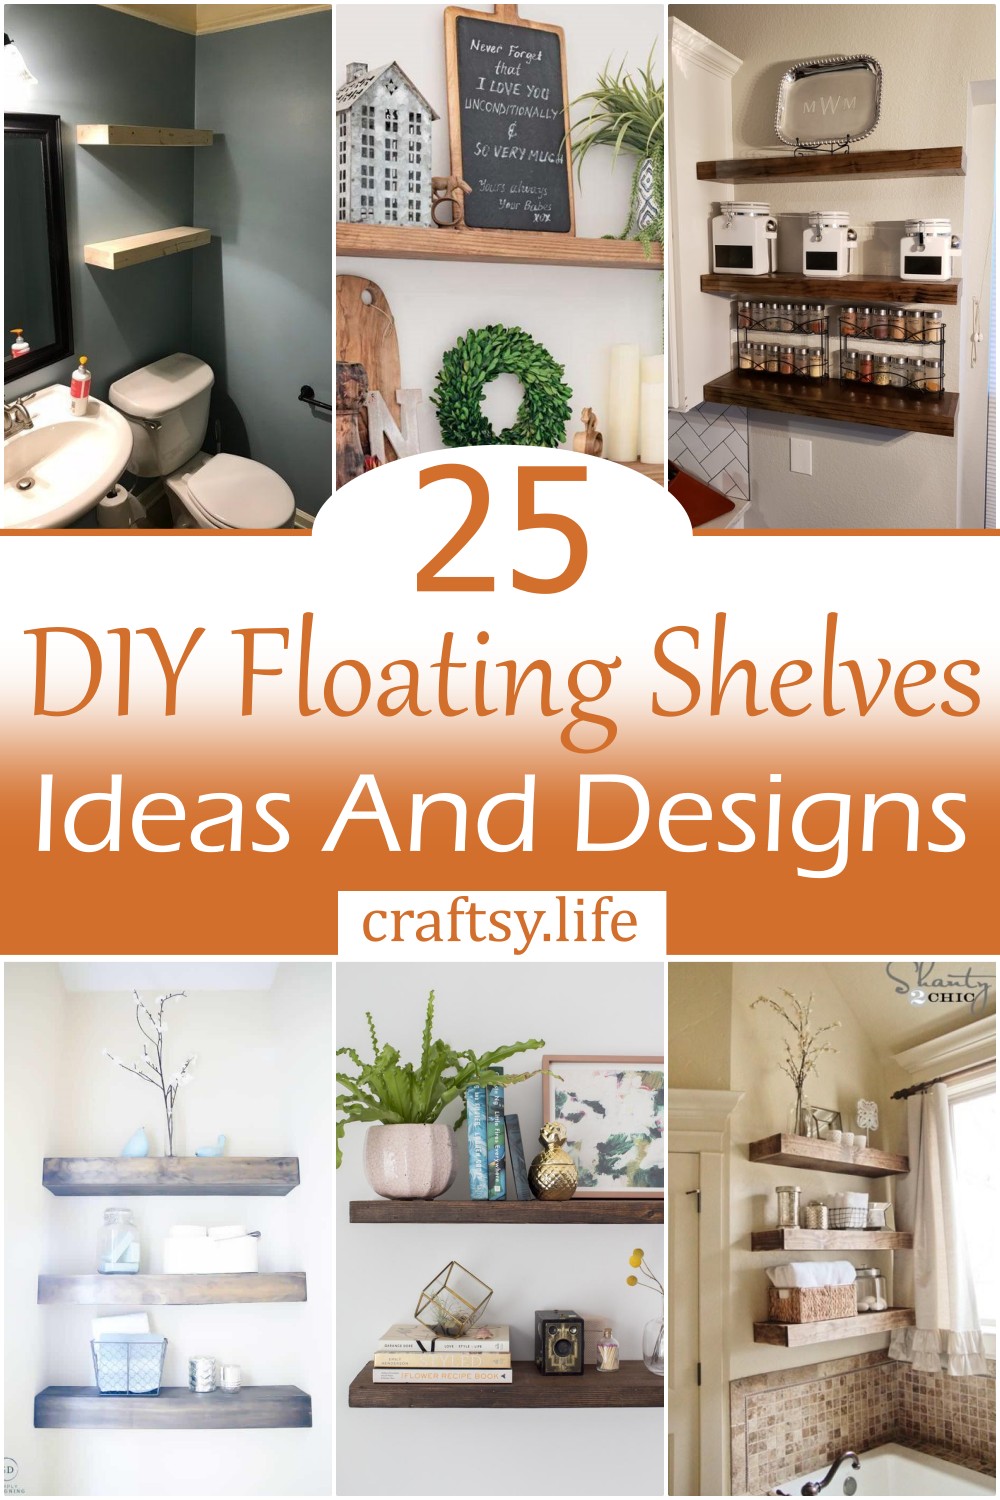 DIY Floating Shelves Ideas And Designs 1